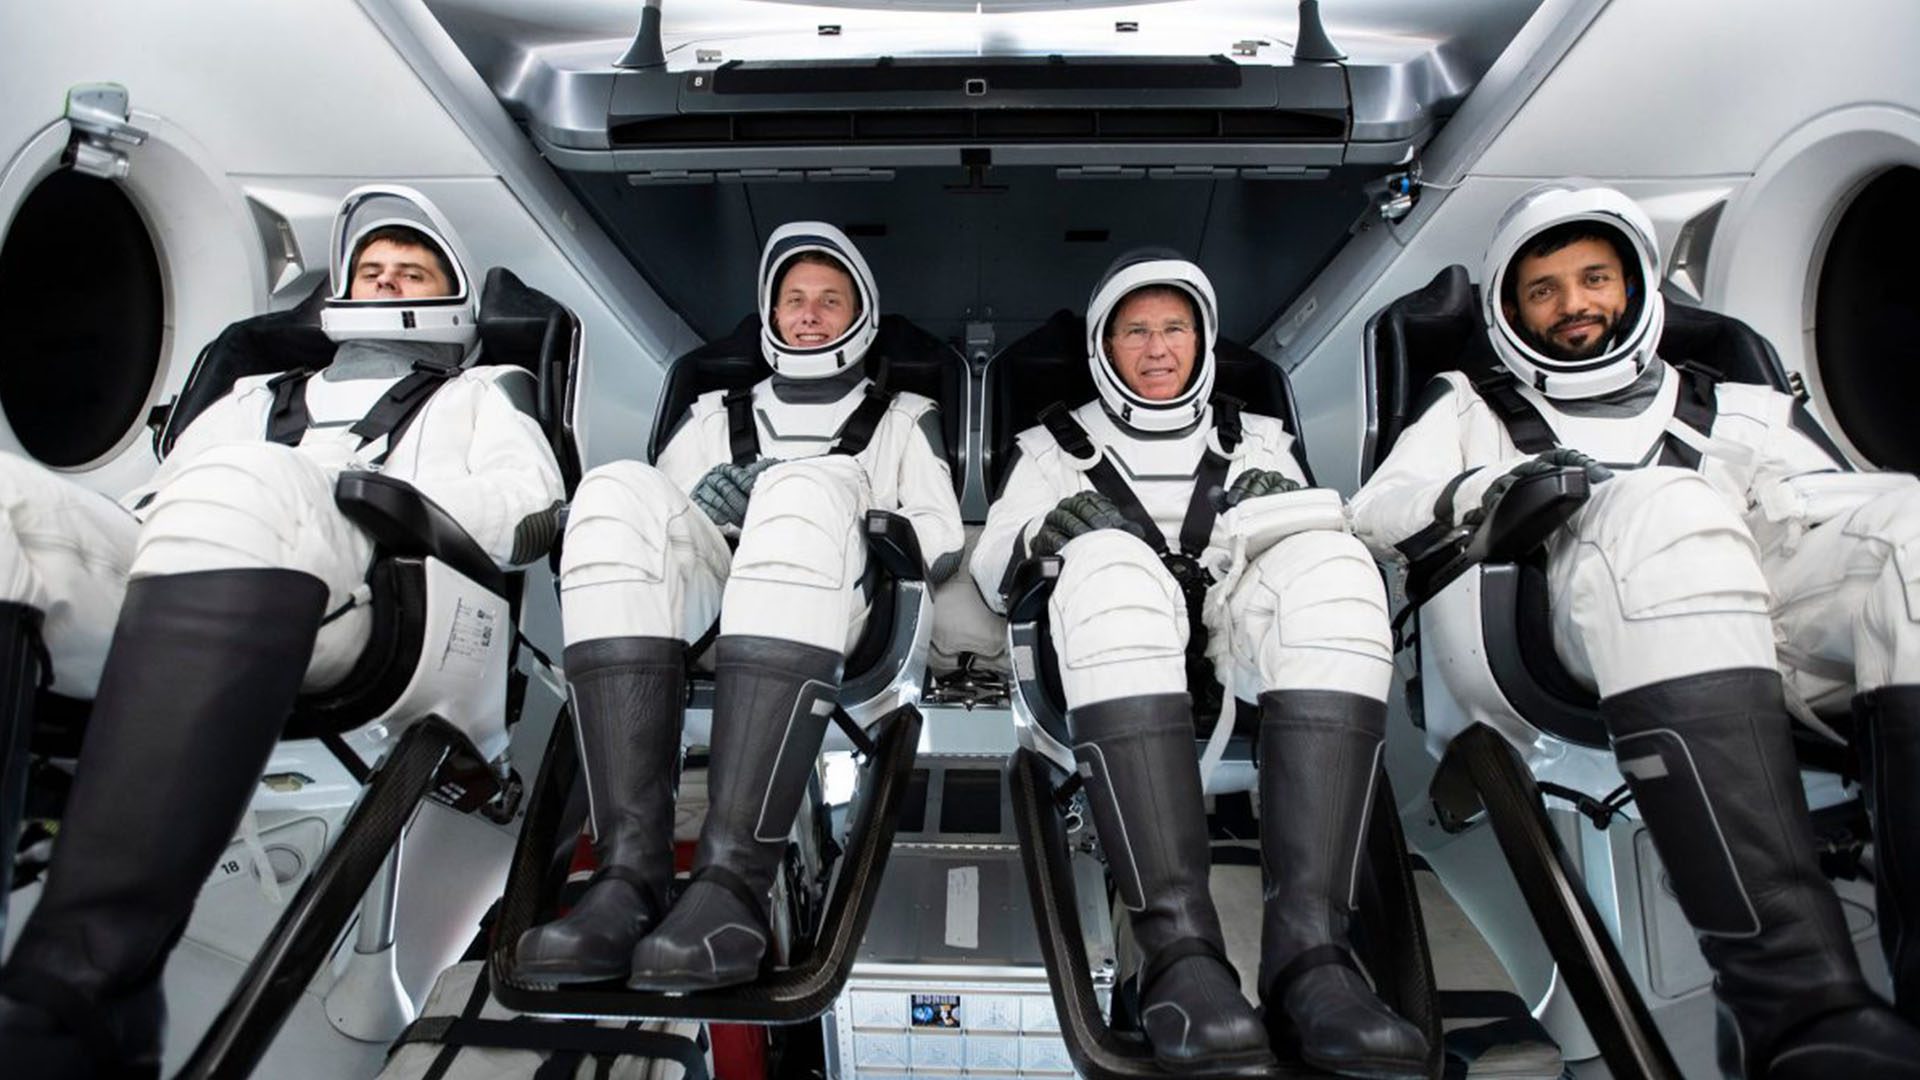 Crew members of NASA’s SpaceX Crew-6 mission